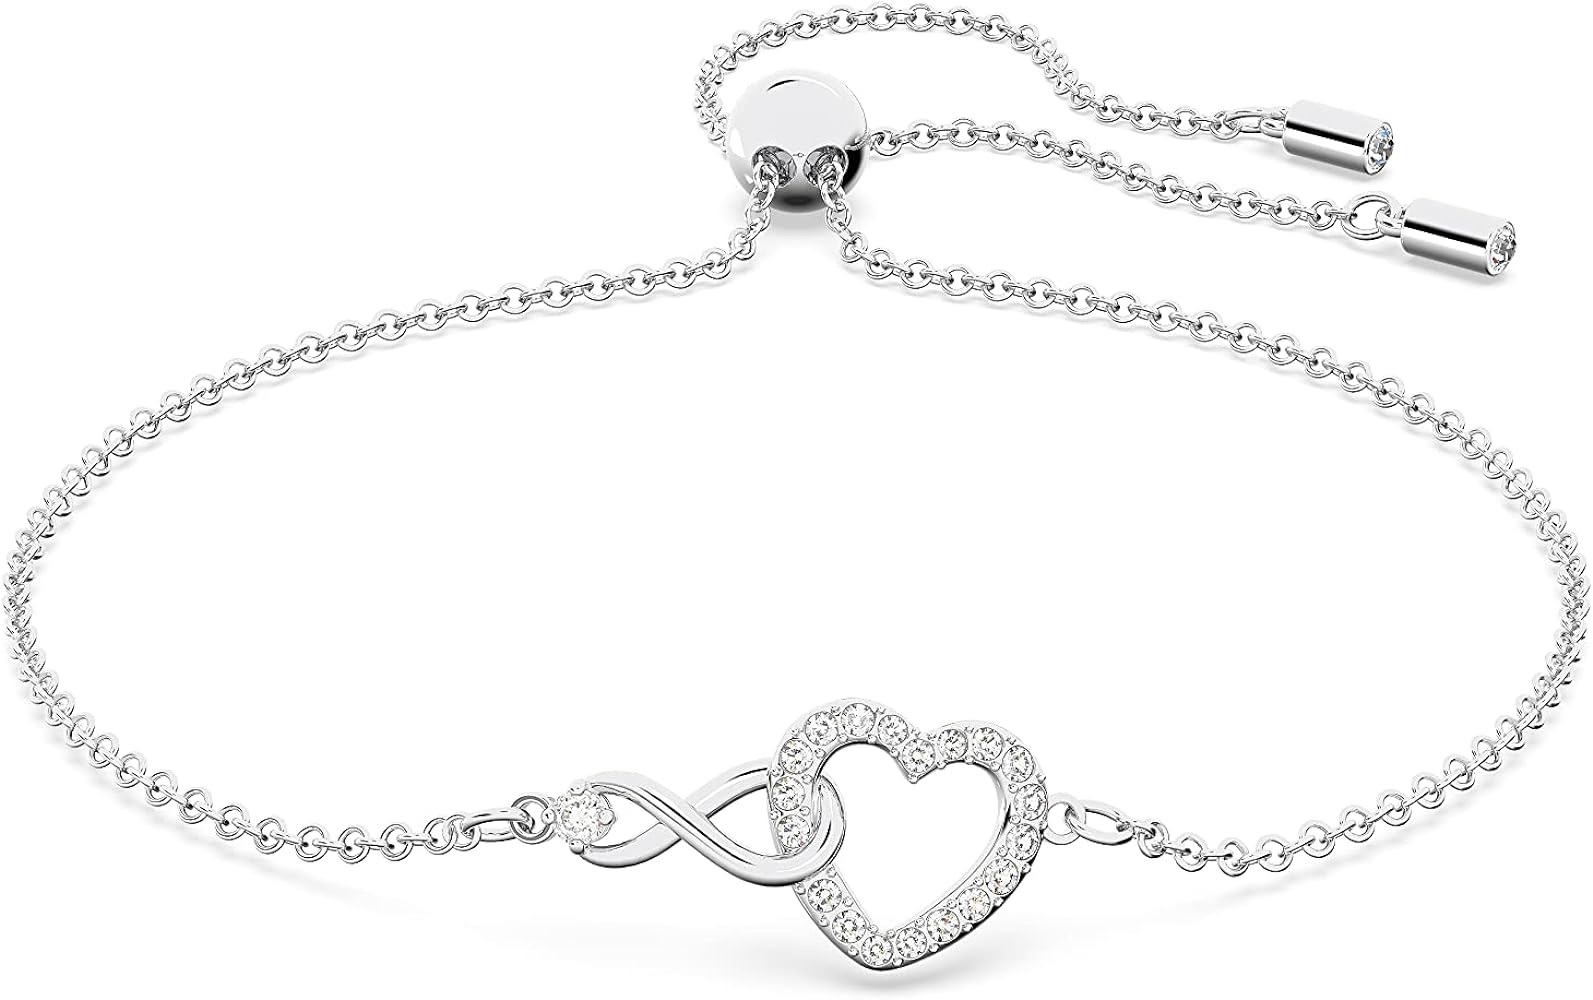 Amazon.com: Swarovski Infinity Heart Bracelet with White Crystals, Infinity Symbol and Heart Intertwined on a Rhodium Plated Adjustable Chain : Clothing, Shoes & Jewelry